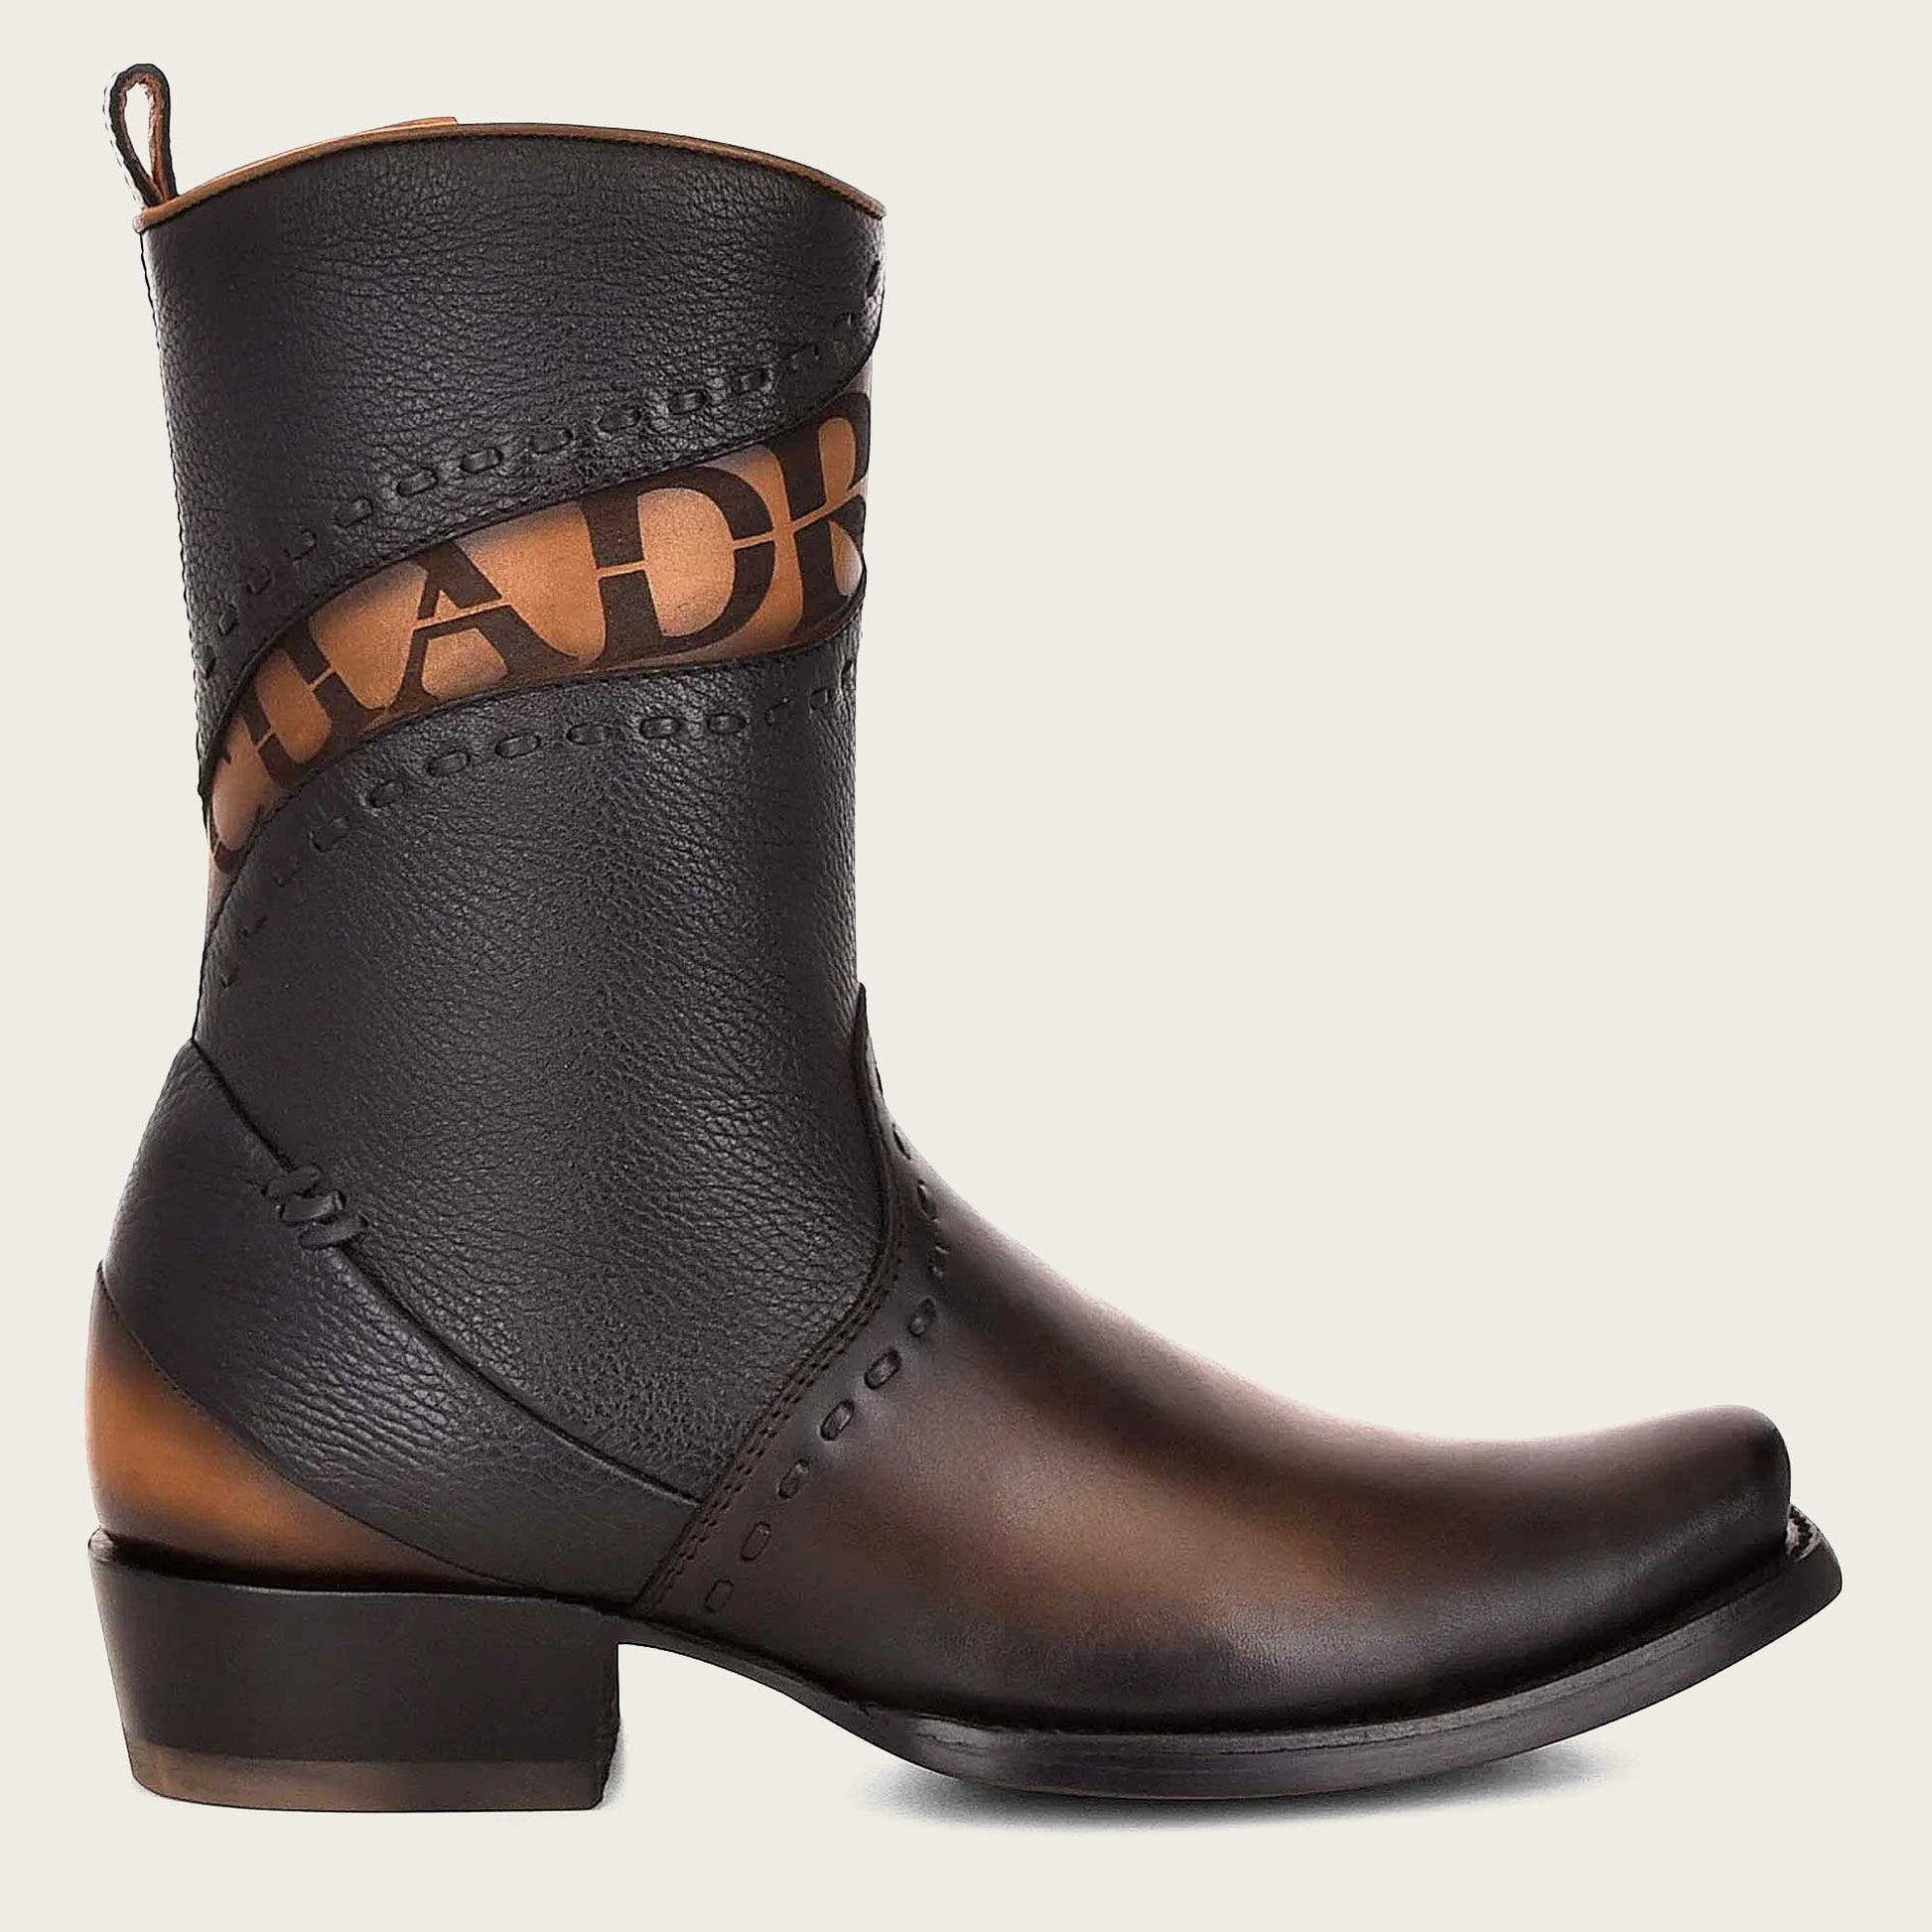 Brown leather engraved boots, for women - 3F66PH - Cuadra Shop